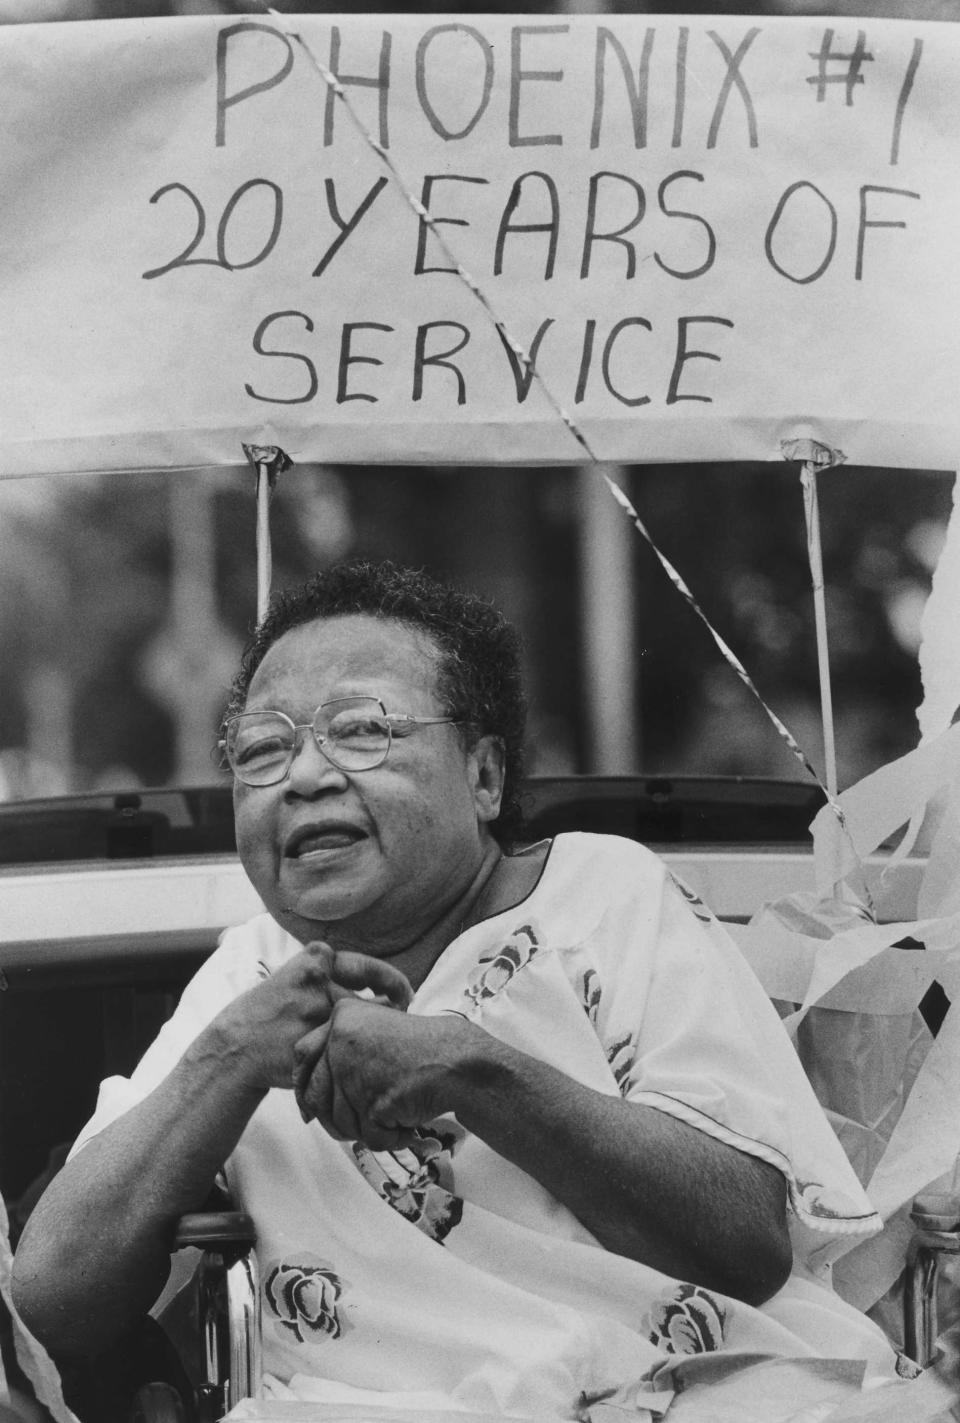 A file photo of Vernell Coleman, founder of the Juneteenth celebration.